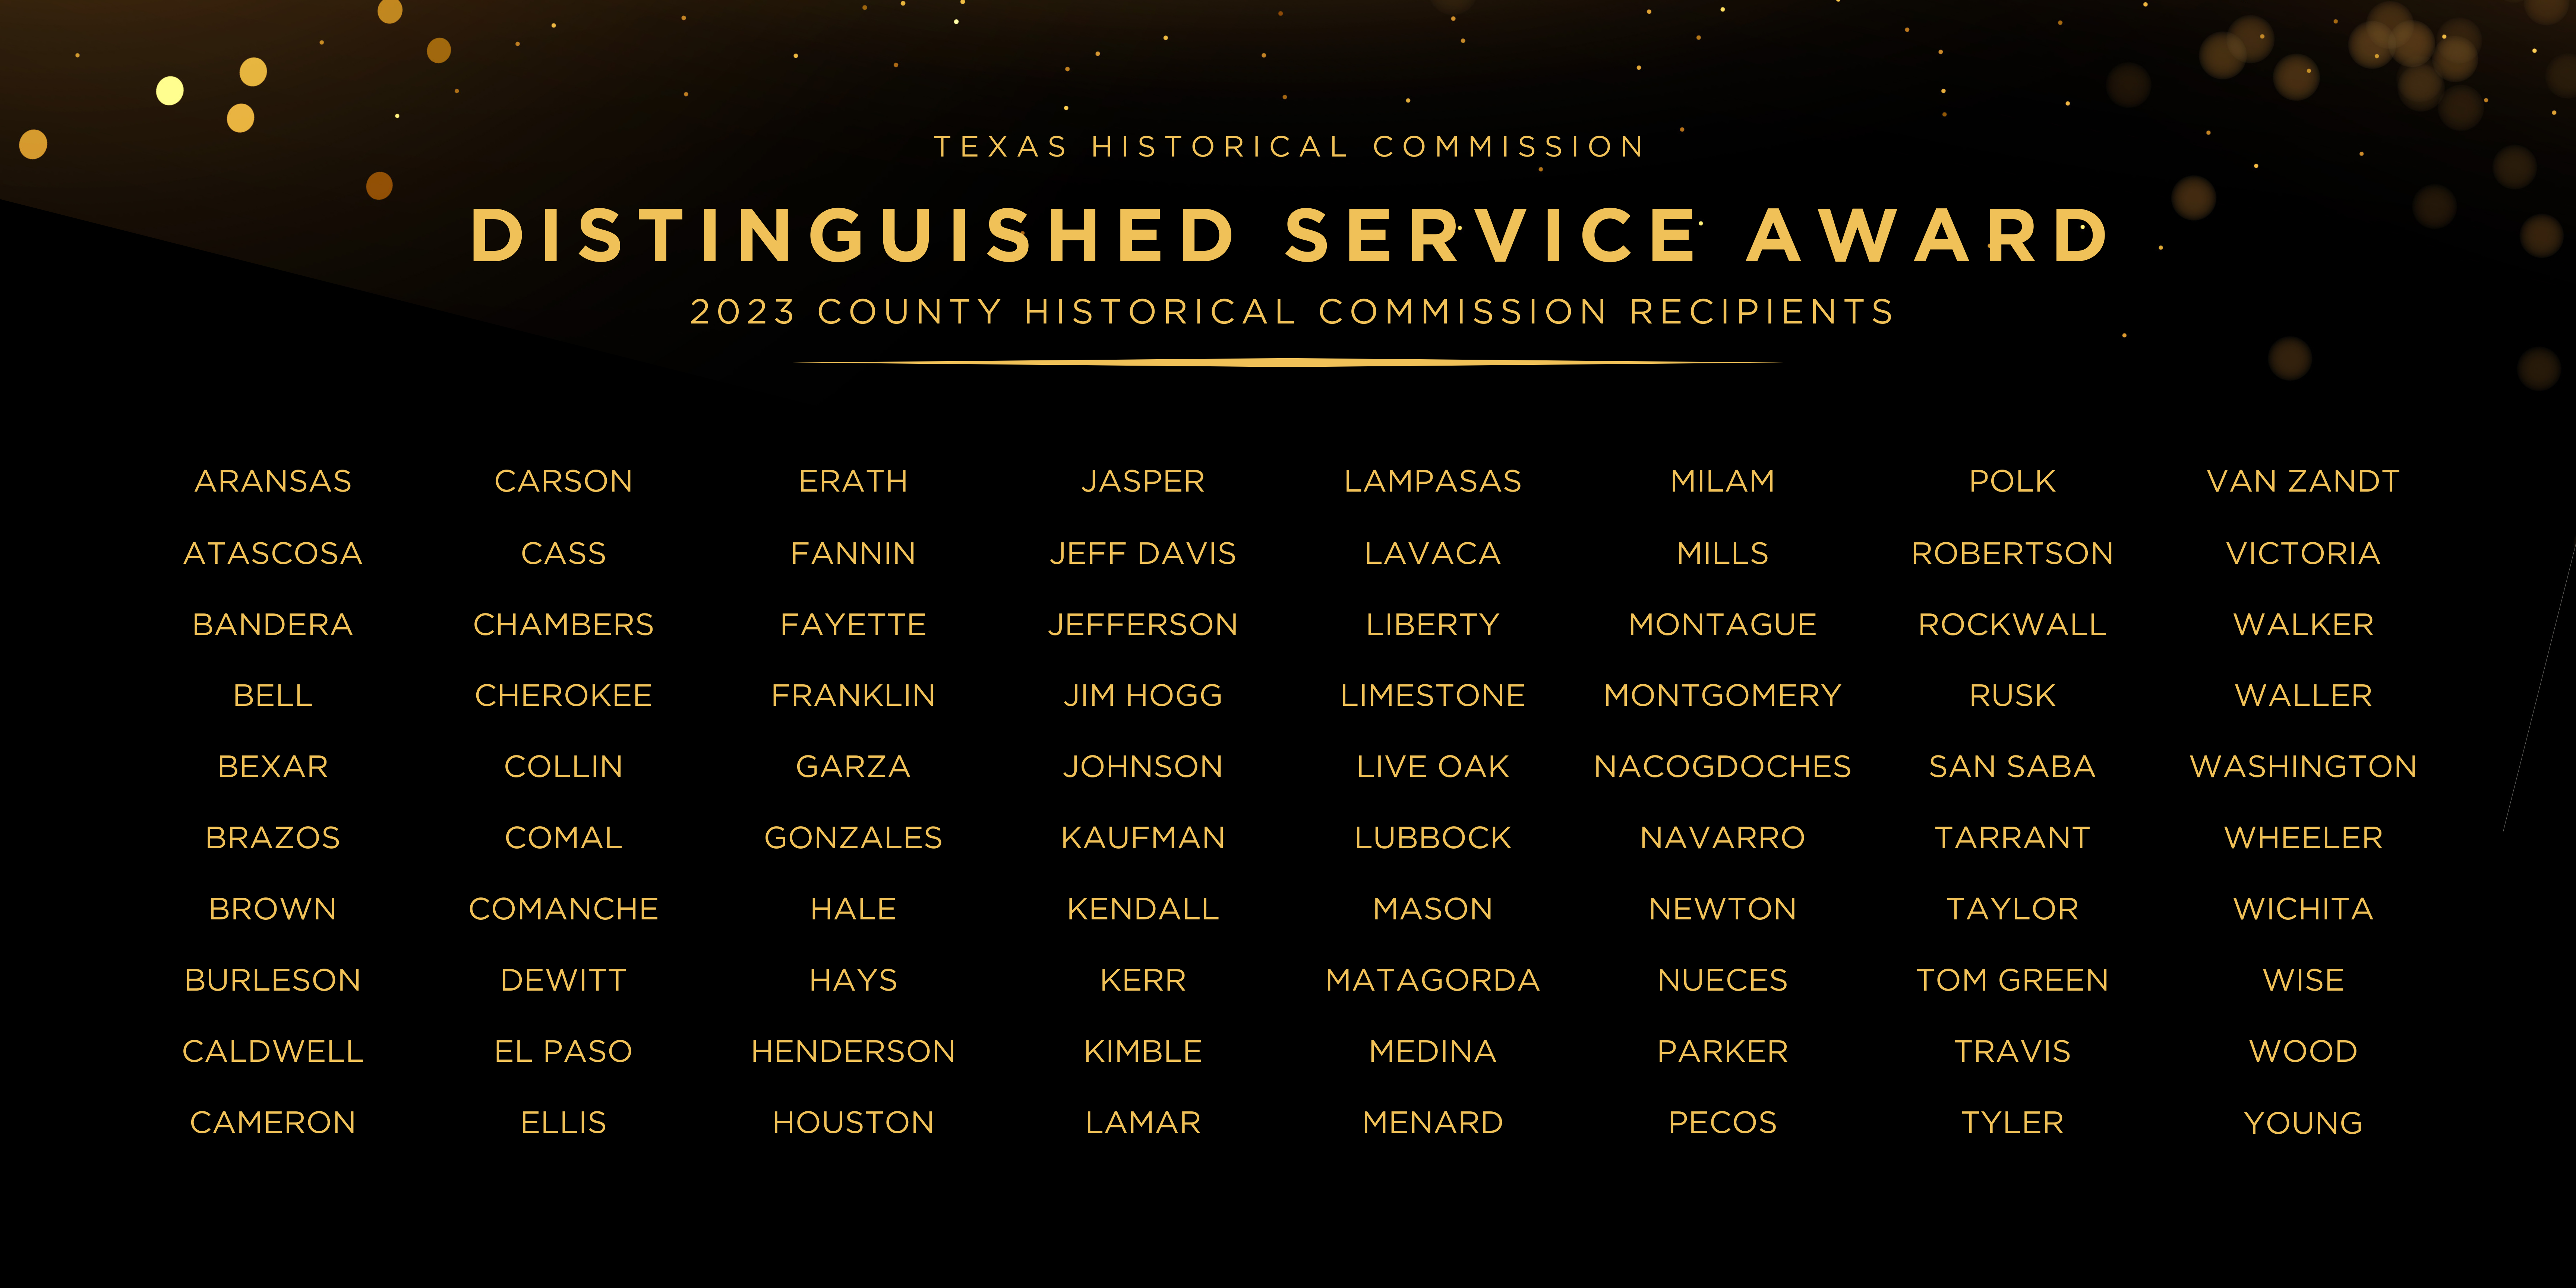 List of 2023 Distinguished Service Award recipients on black sparkly background.